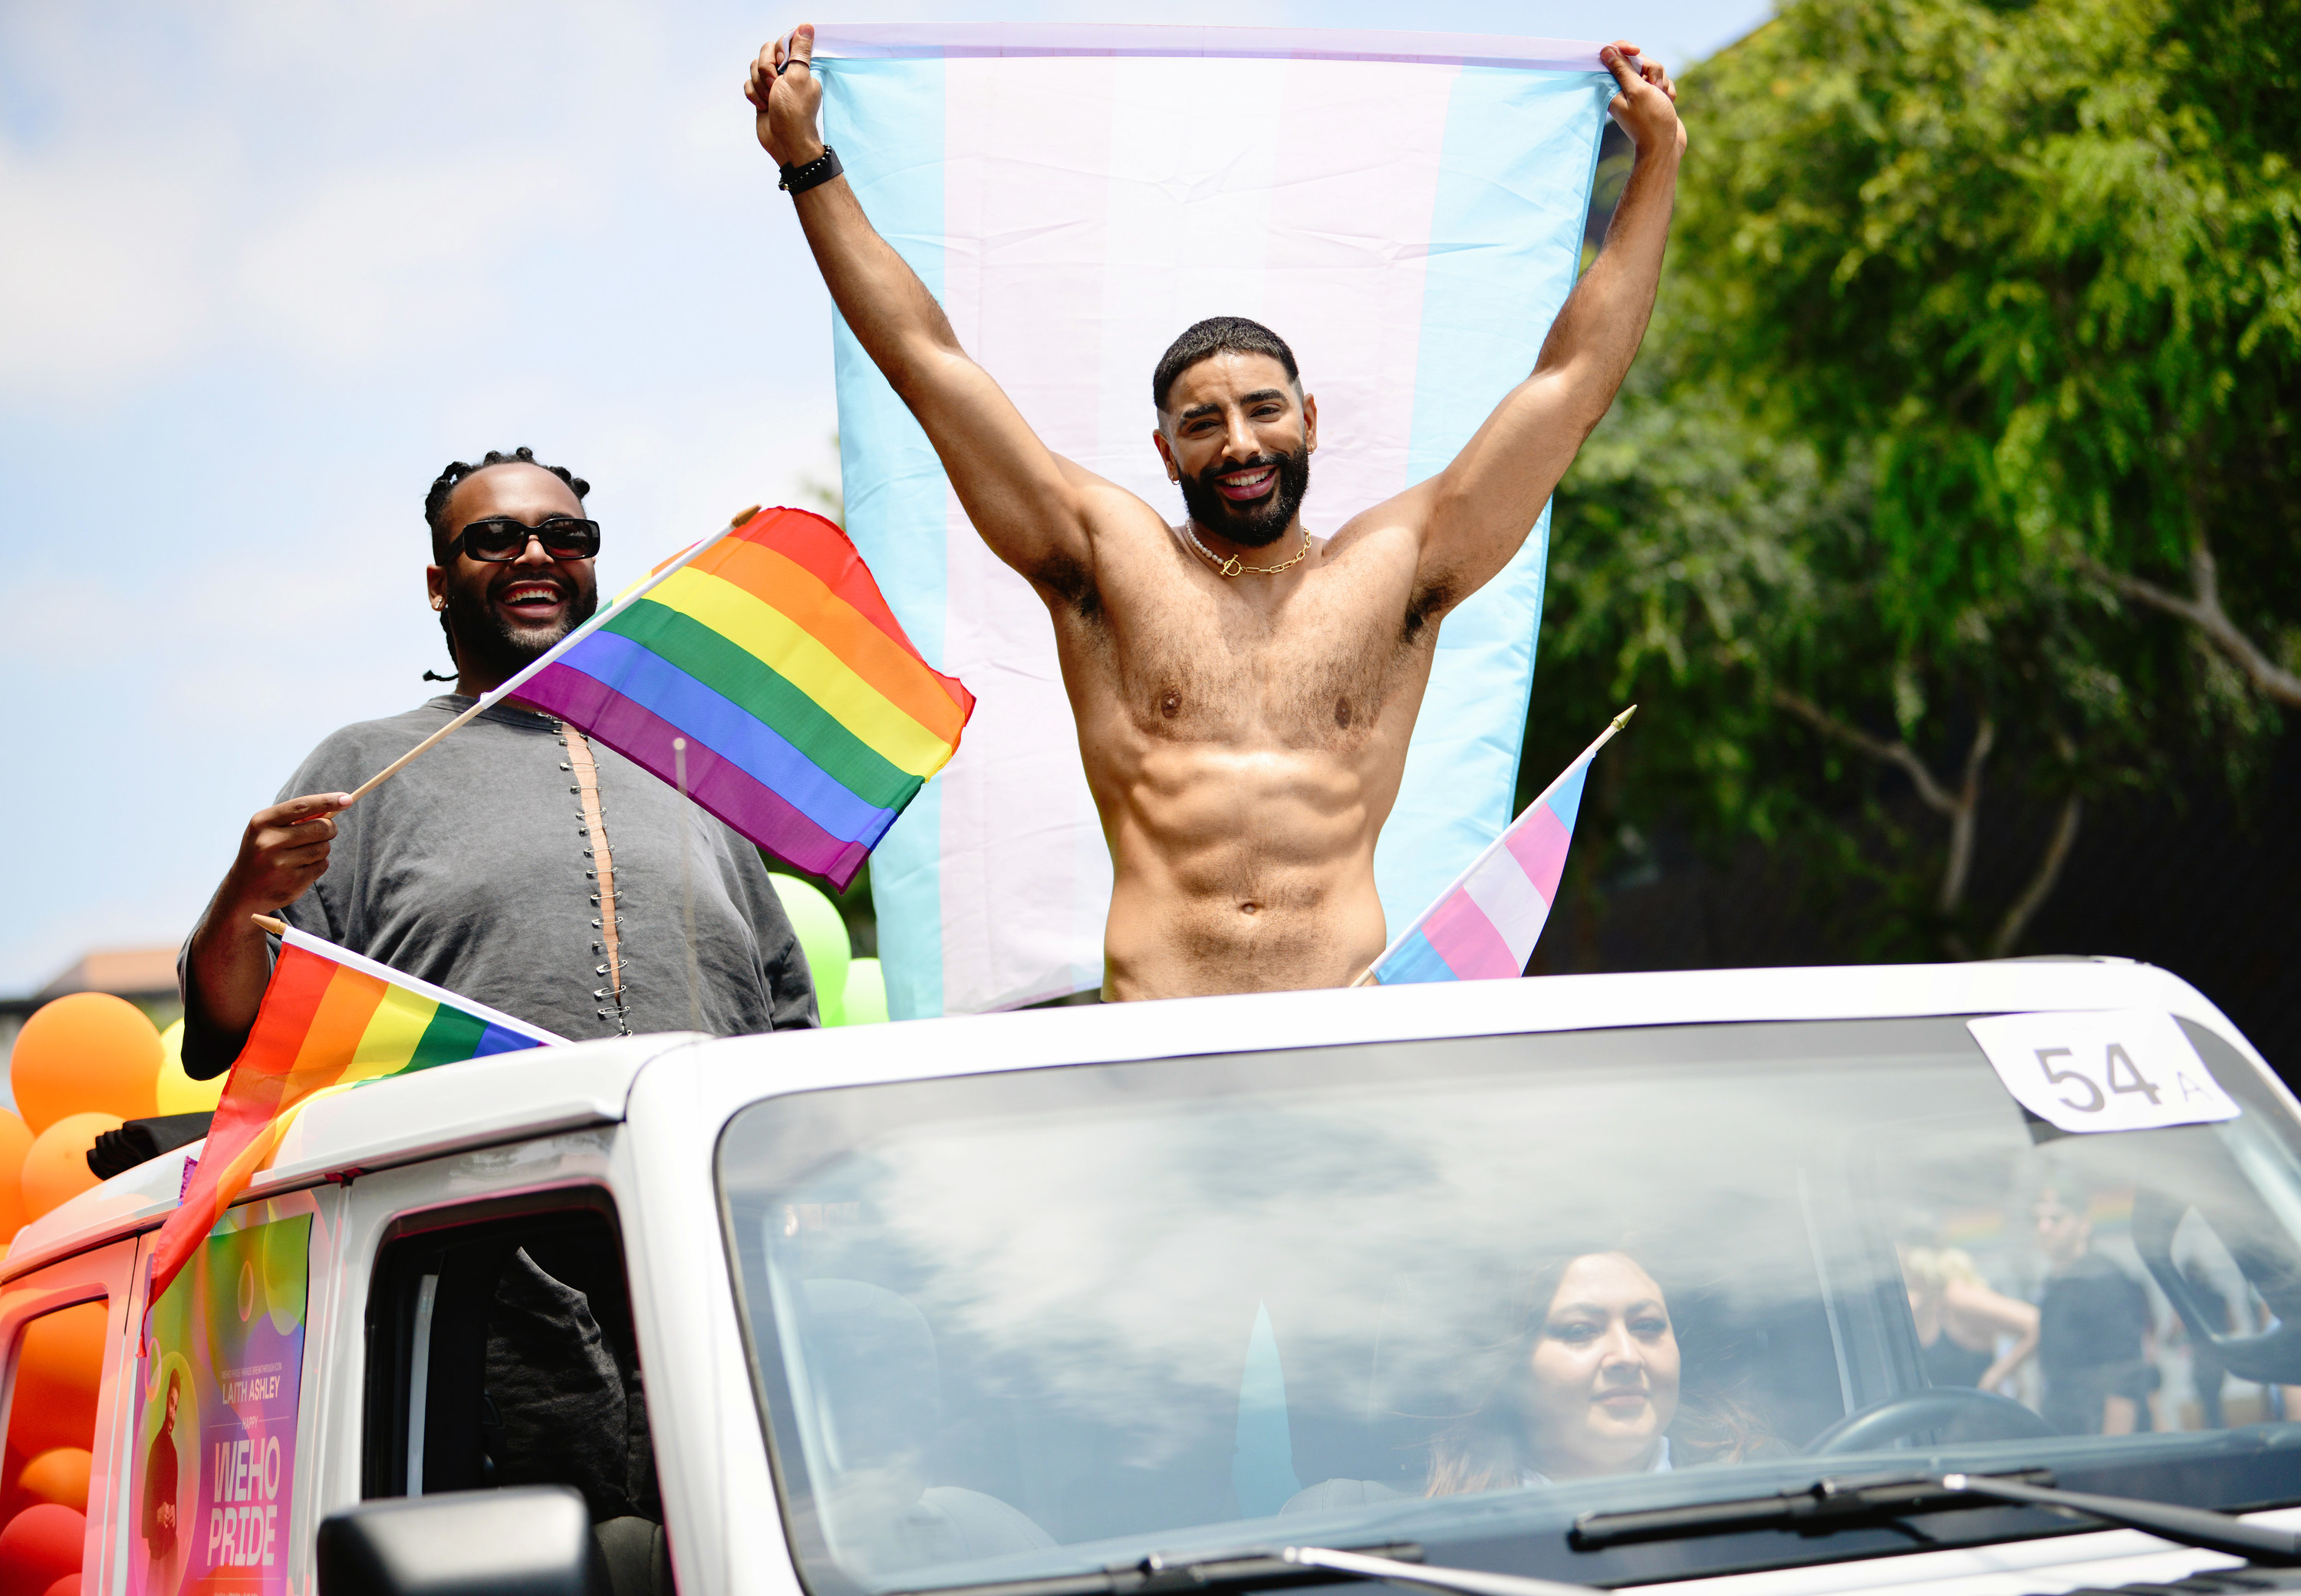 Laith Ashley at the parade standing in a car holding up the Transgender flag